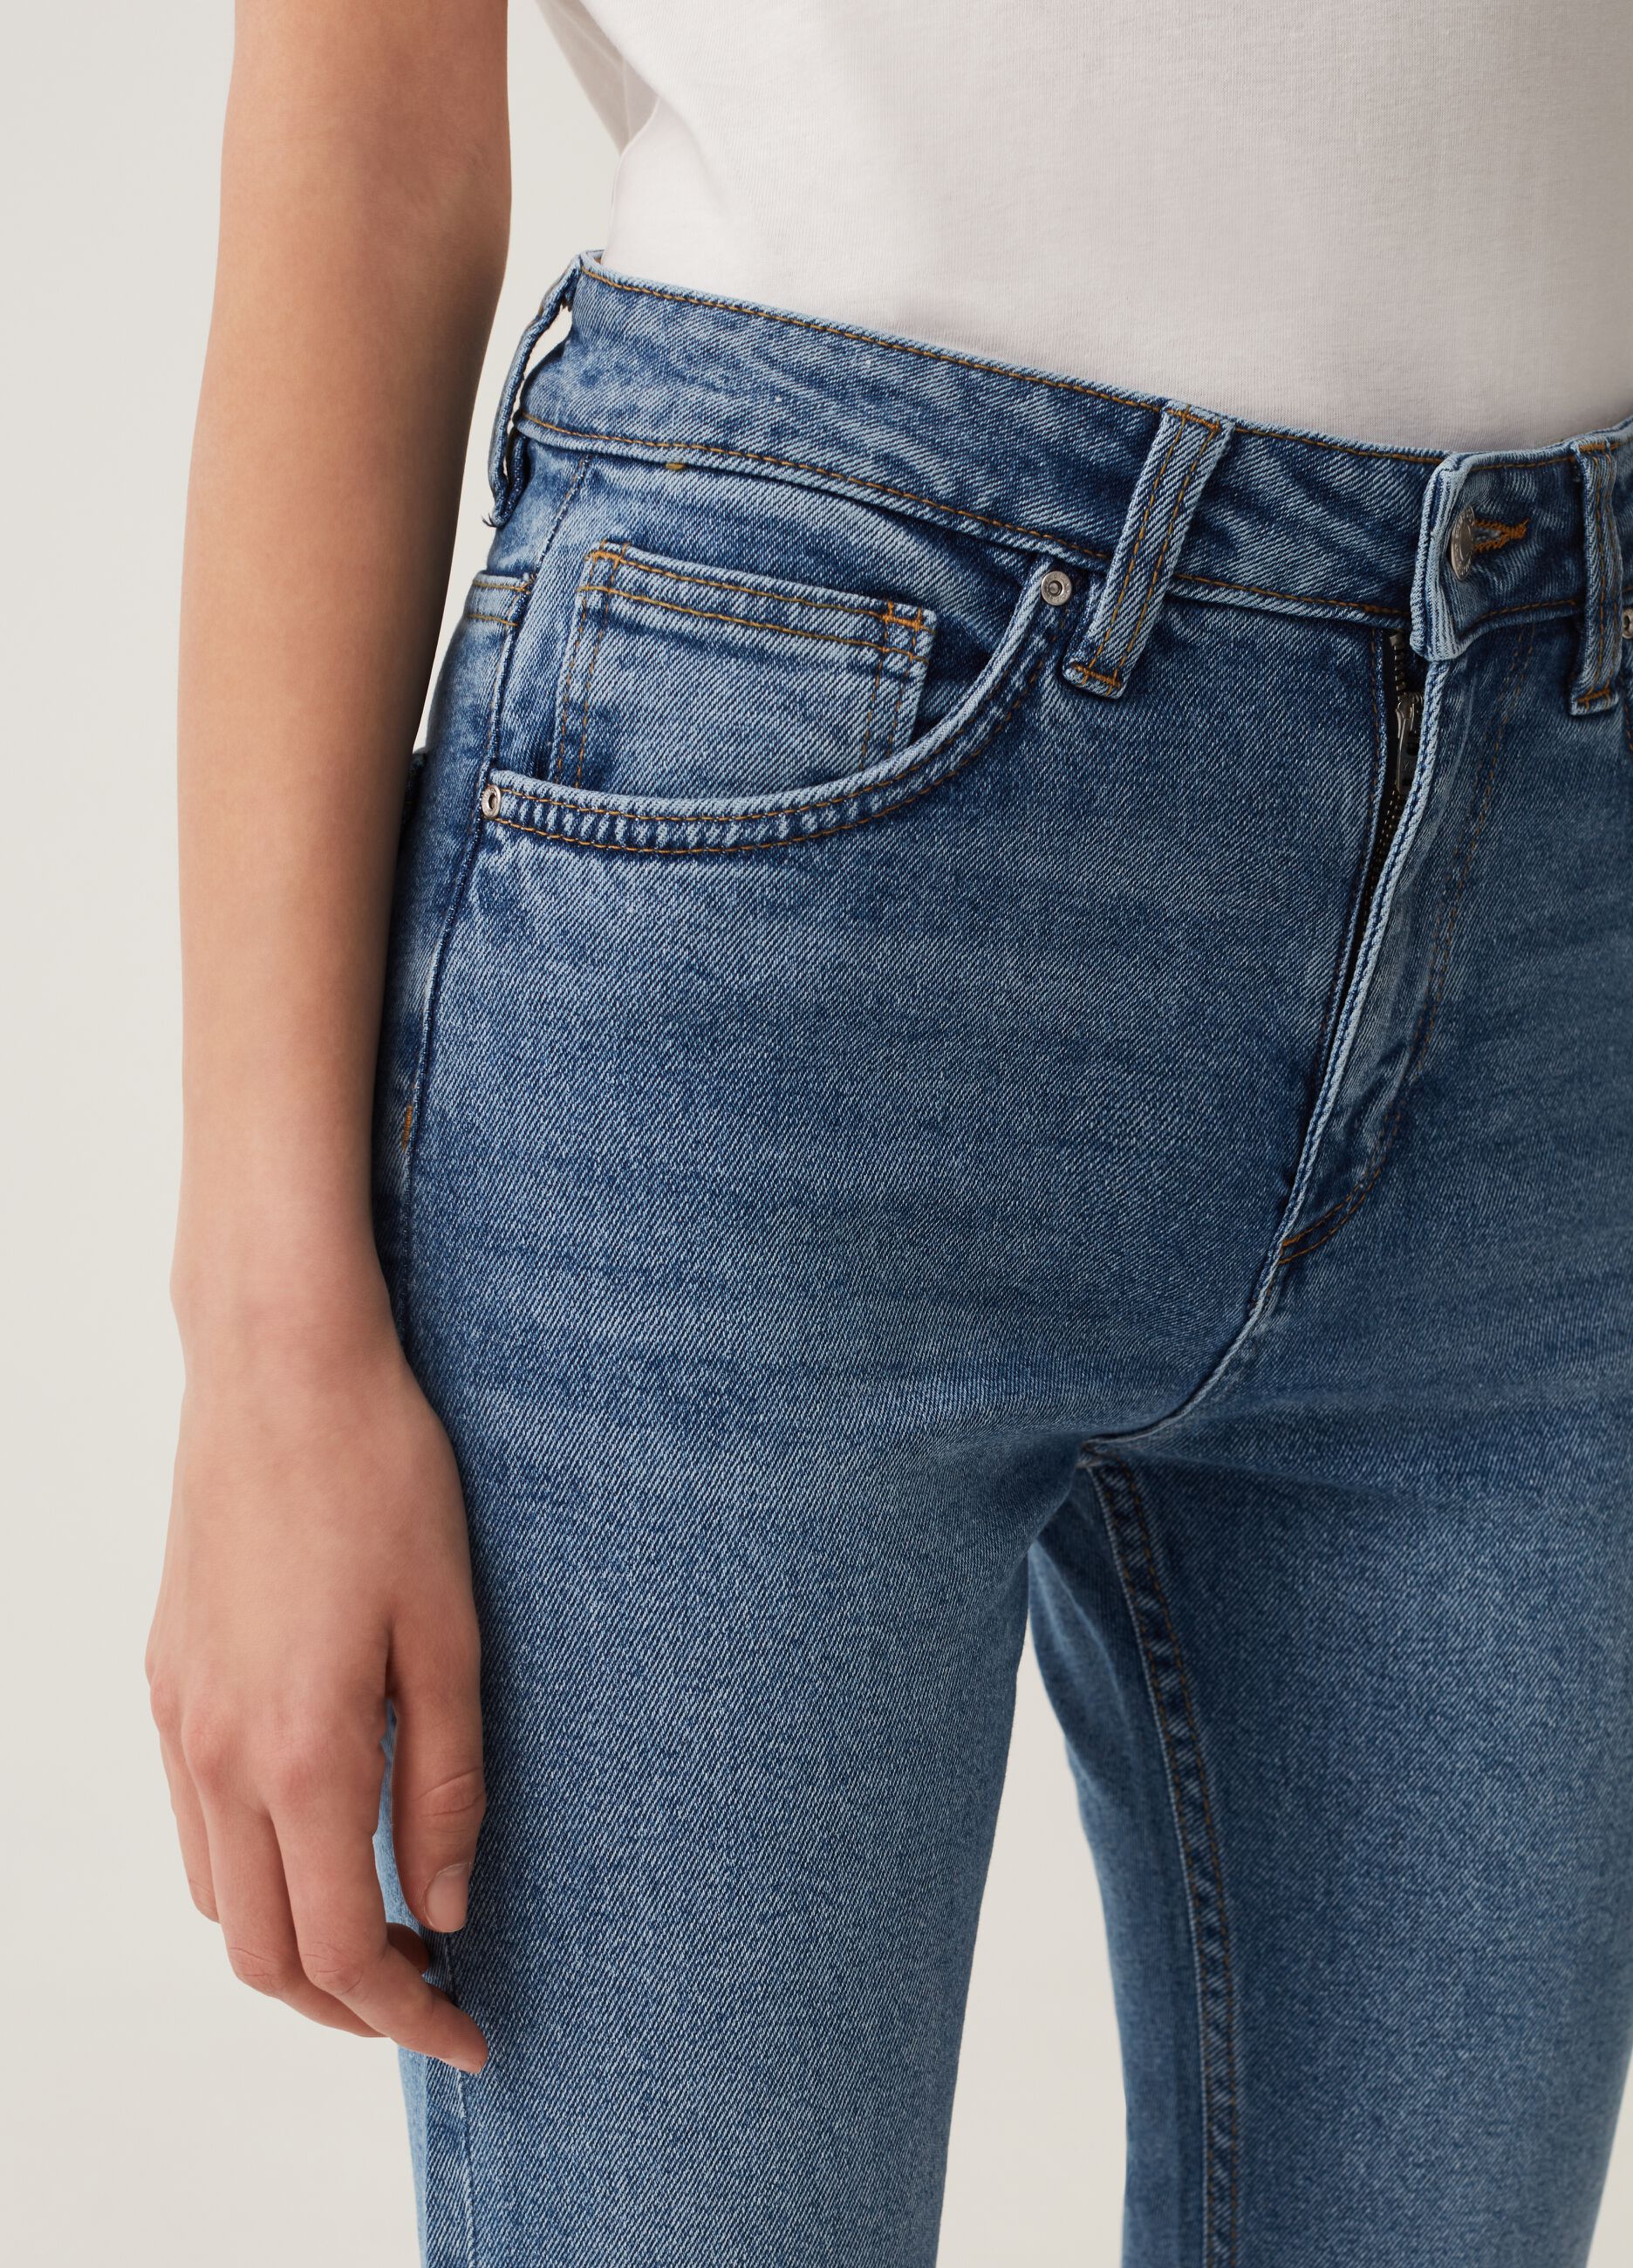 Flare-fit jeans with raw edging